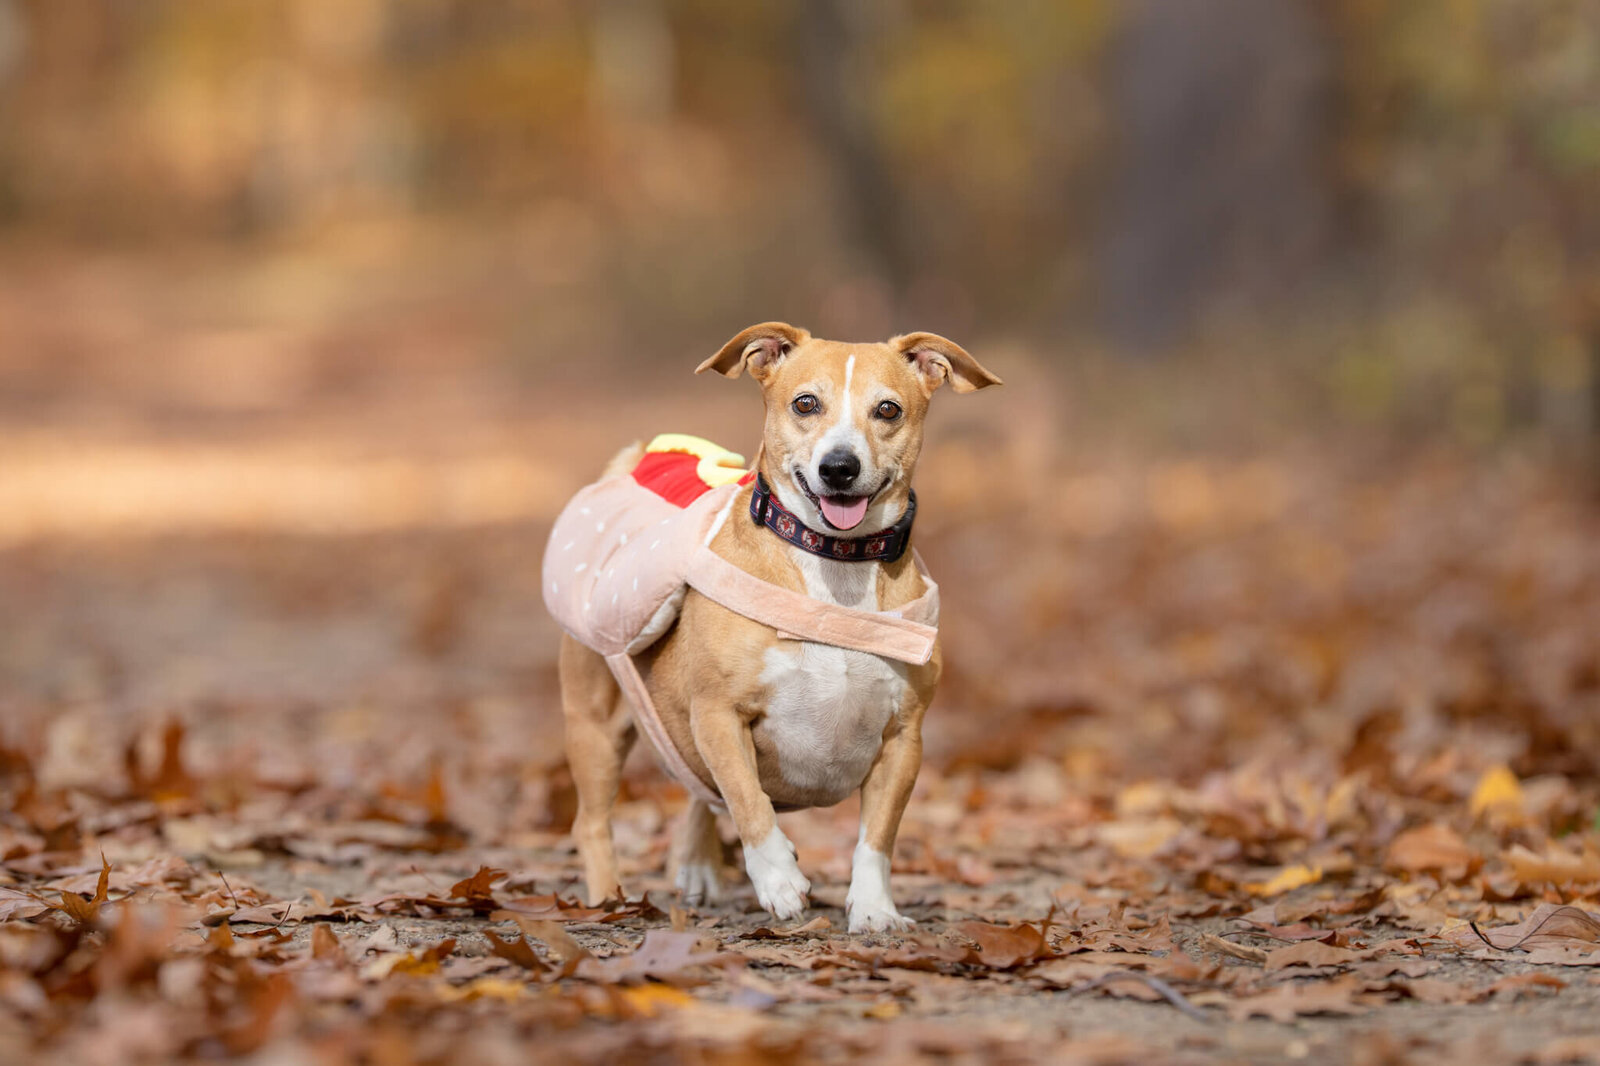 Smiling Tan and white mixed breed rescue pup wearing hotdog costume in Boston area forest